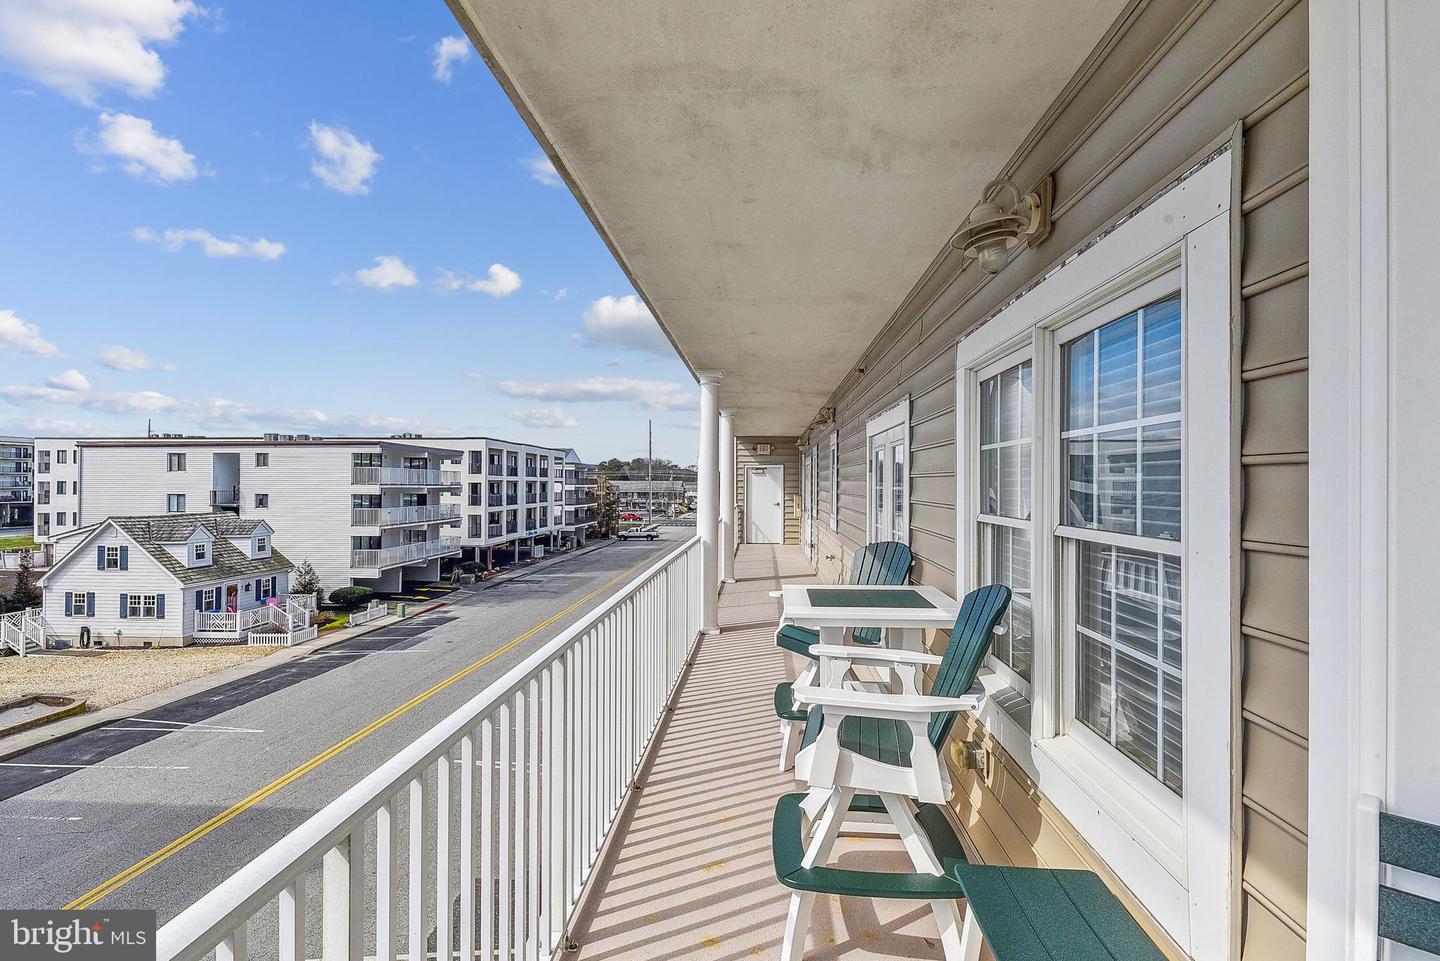 MDWO2019340-802918959998-2024-03-12-11-41-10 14301 Wight St #201 | Ocean City, MD Real Estate For Sale | MLS# Mdwo2019340  - 1st Choice Properties